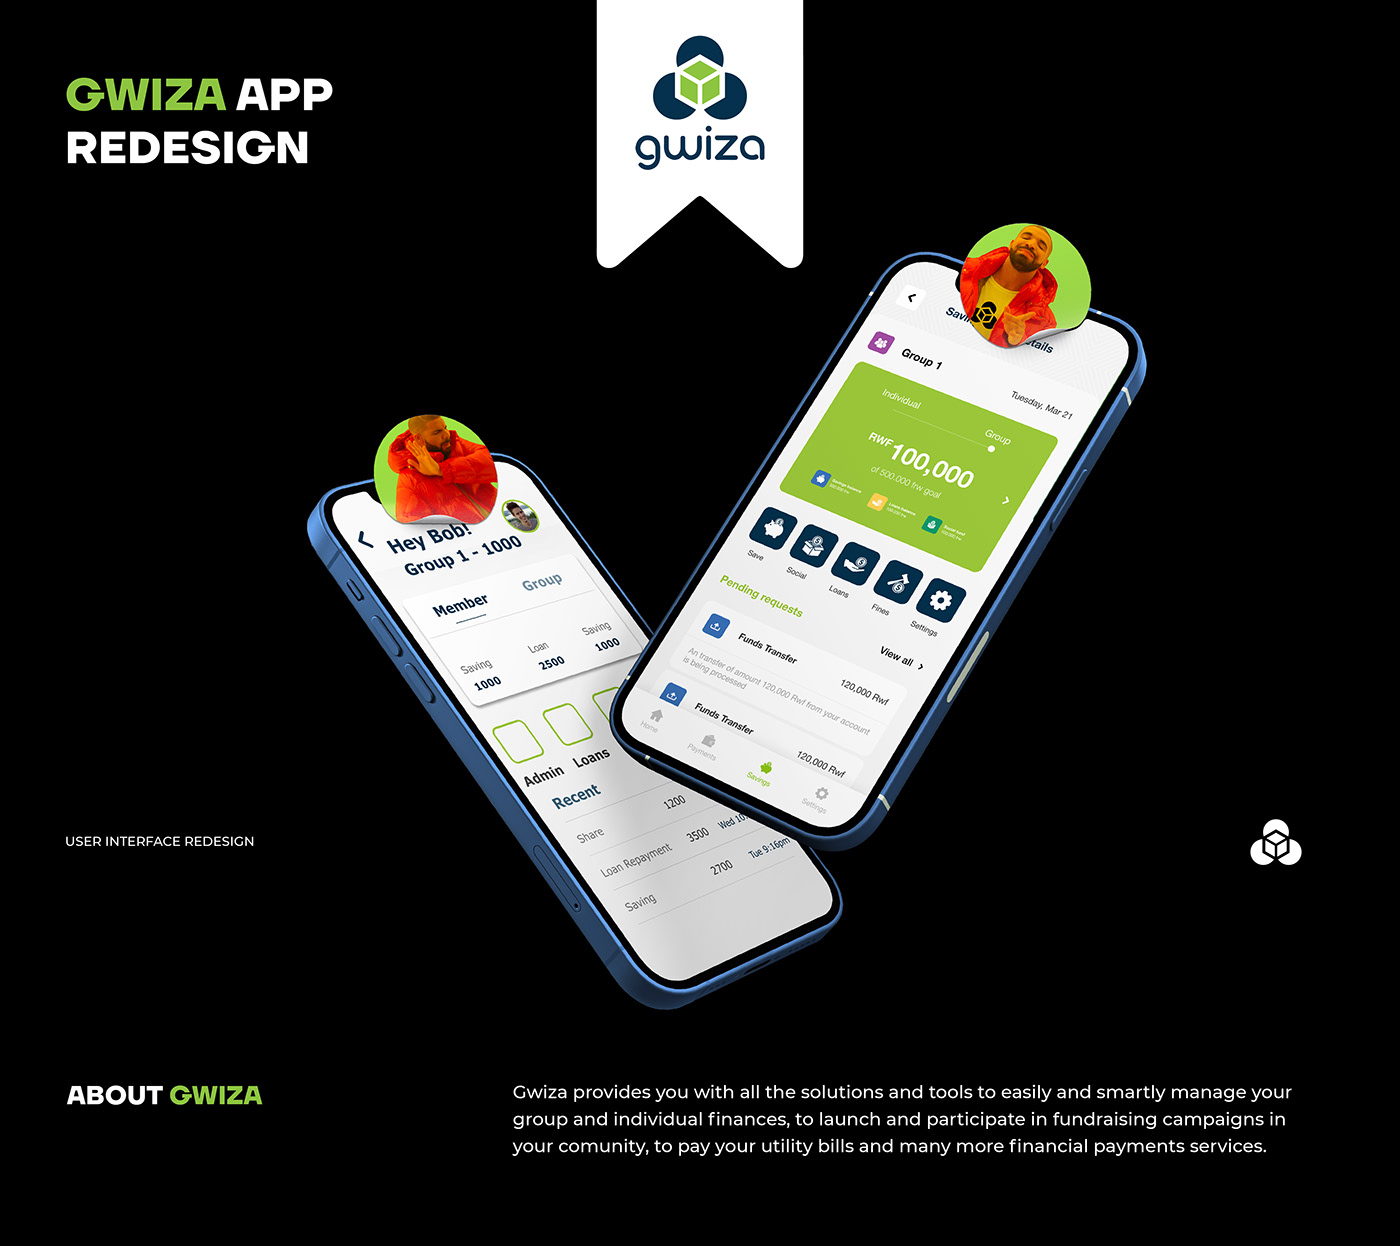 Gwiza App Redesign